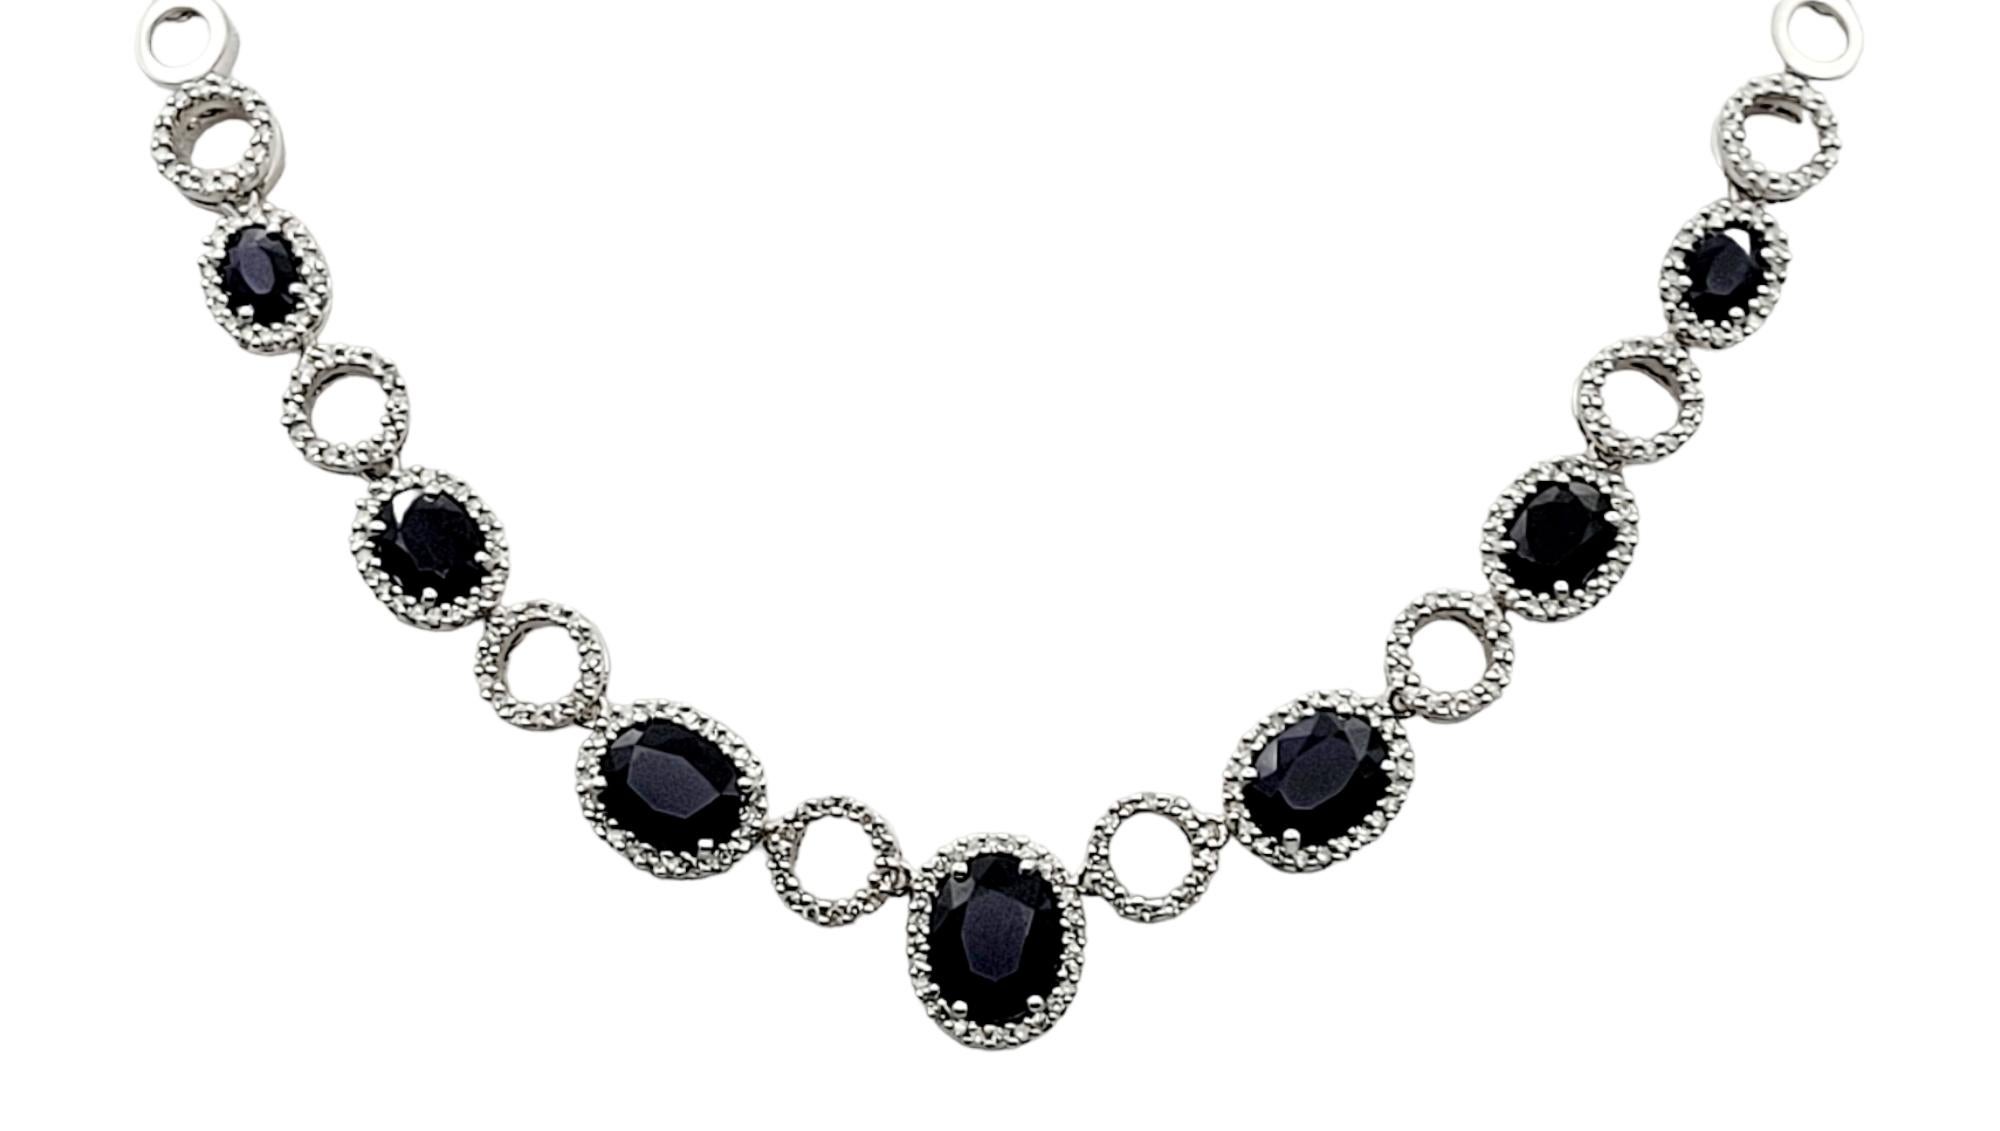 Incredibly gorgeous sapphire and diamond necklace with a rich, elegant pop of color. This fantastic piece absolutely dazzles with its dark blue sapphires and icy white diamonds. The striking necklace sits elegantly across the chest, sparkling from